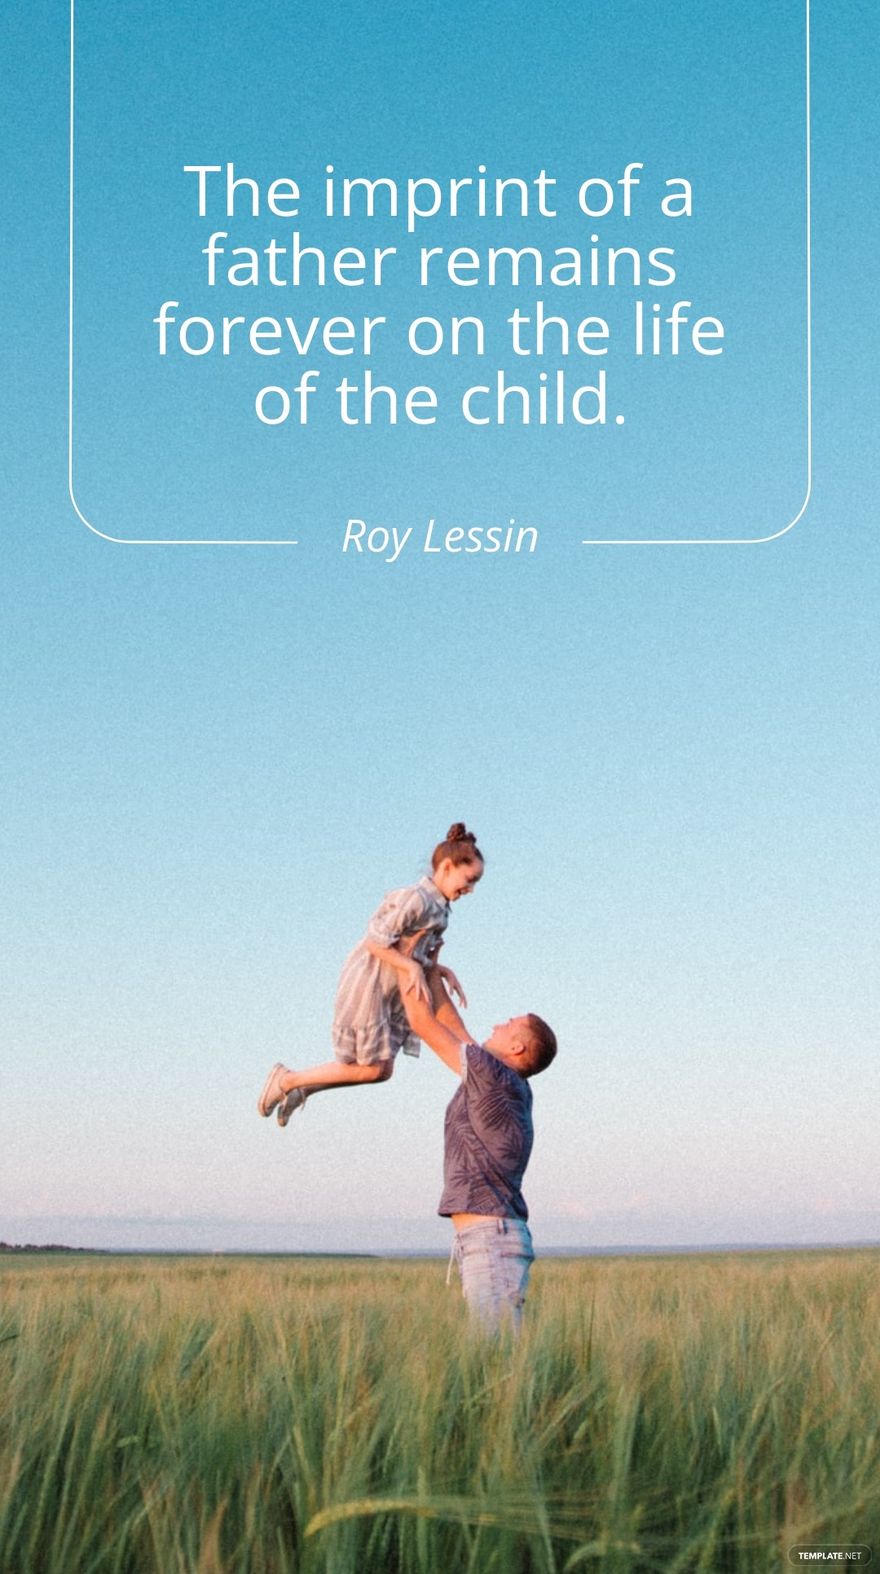 Free Roy Lessin - The imprint of a father remains forever on the life of the child. in JPG